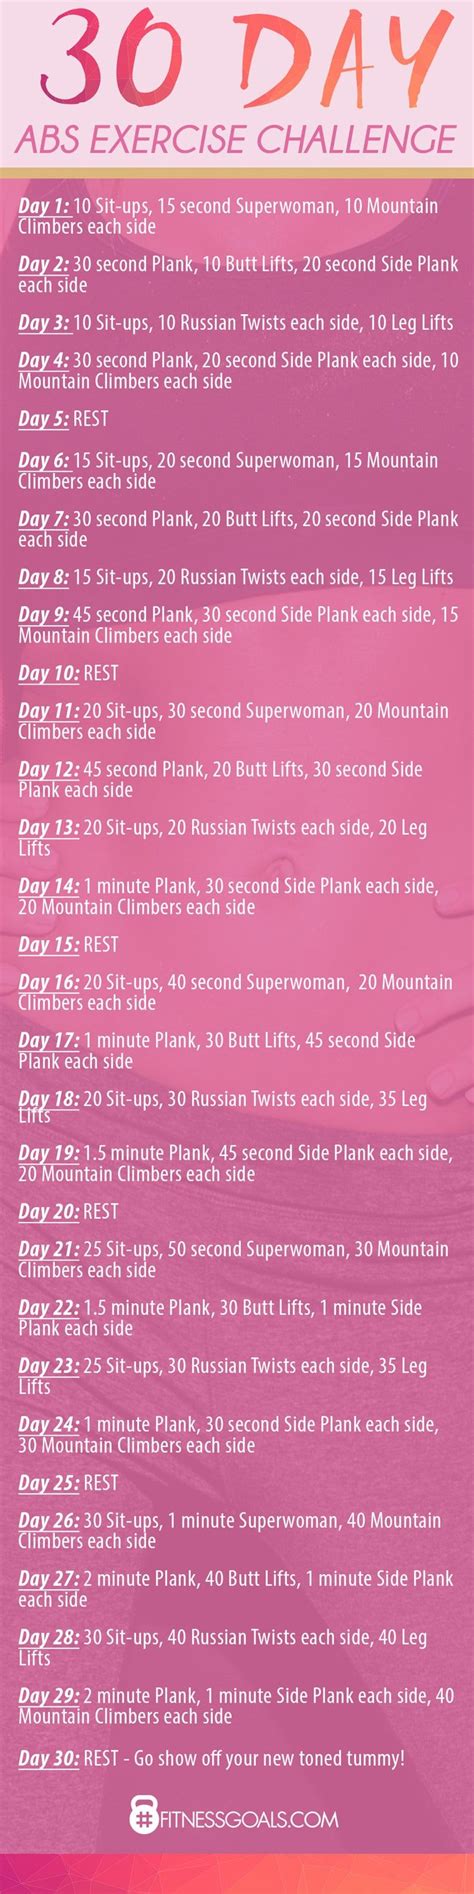 Pin By Lb On Doen Dit Net 30 Day Abs Core Exercises For Women 30